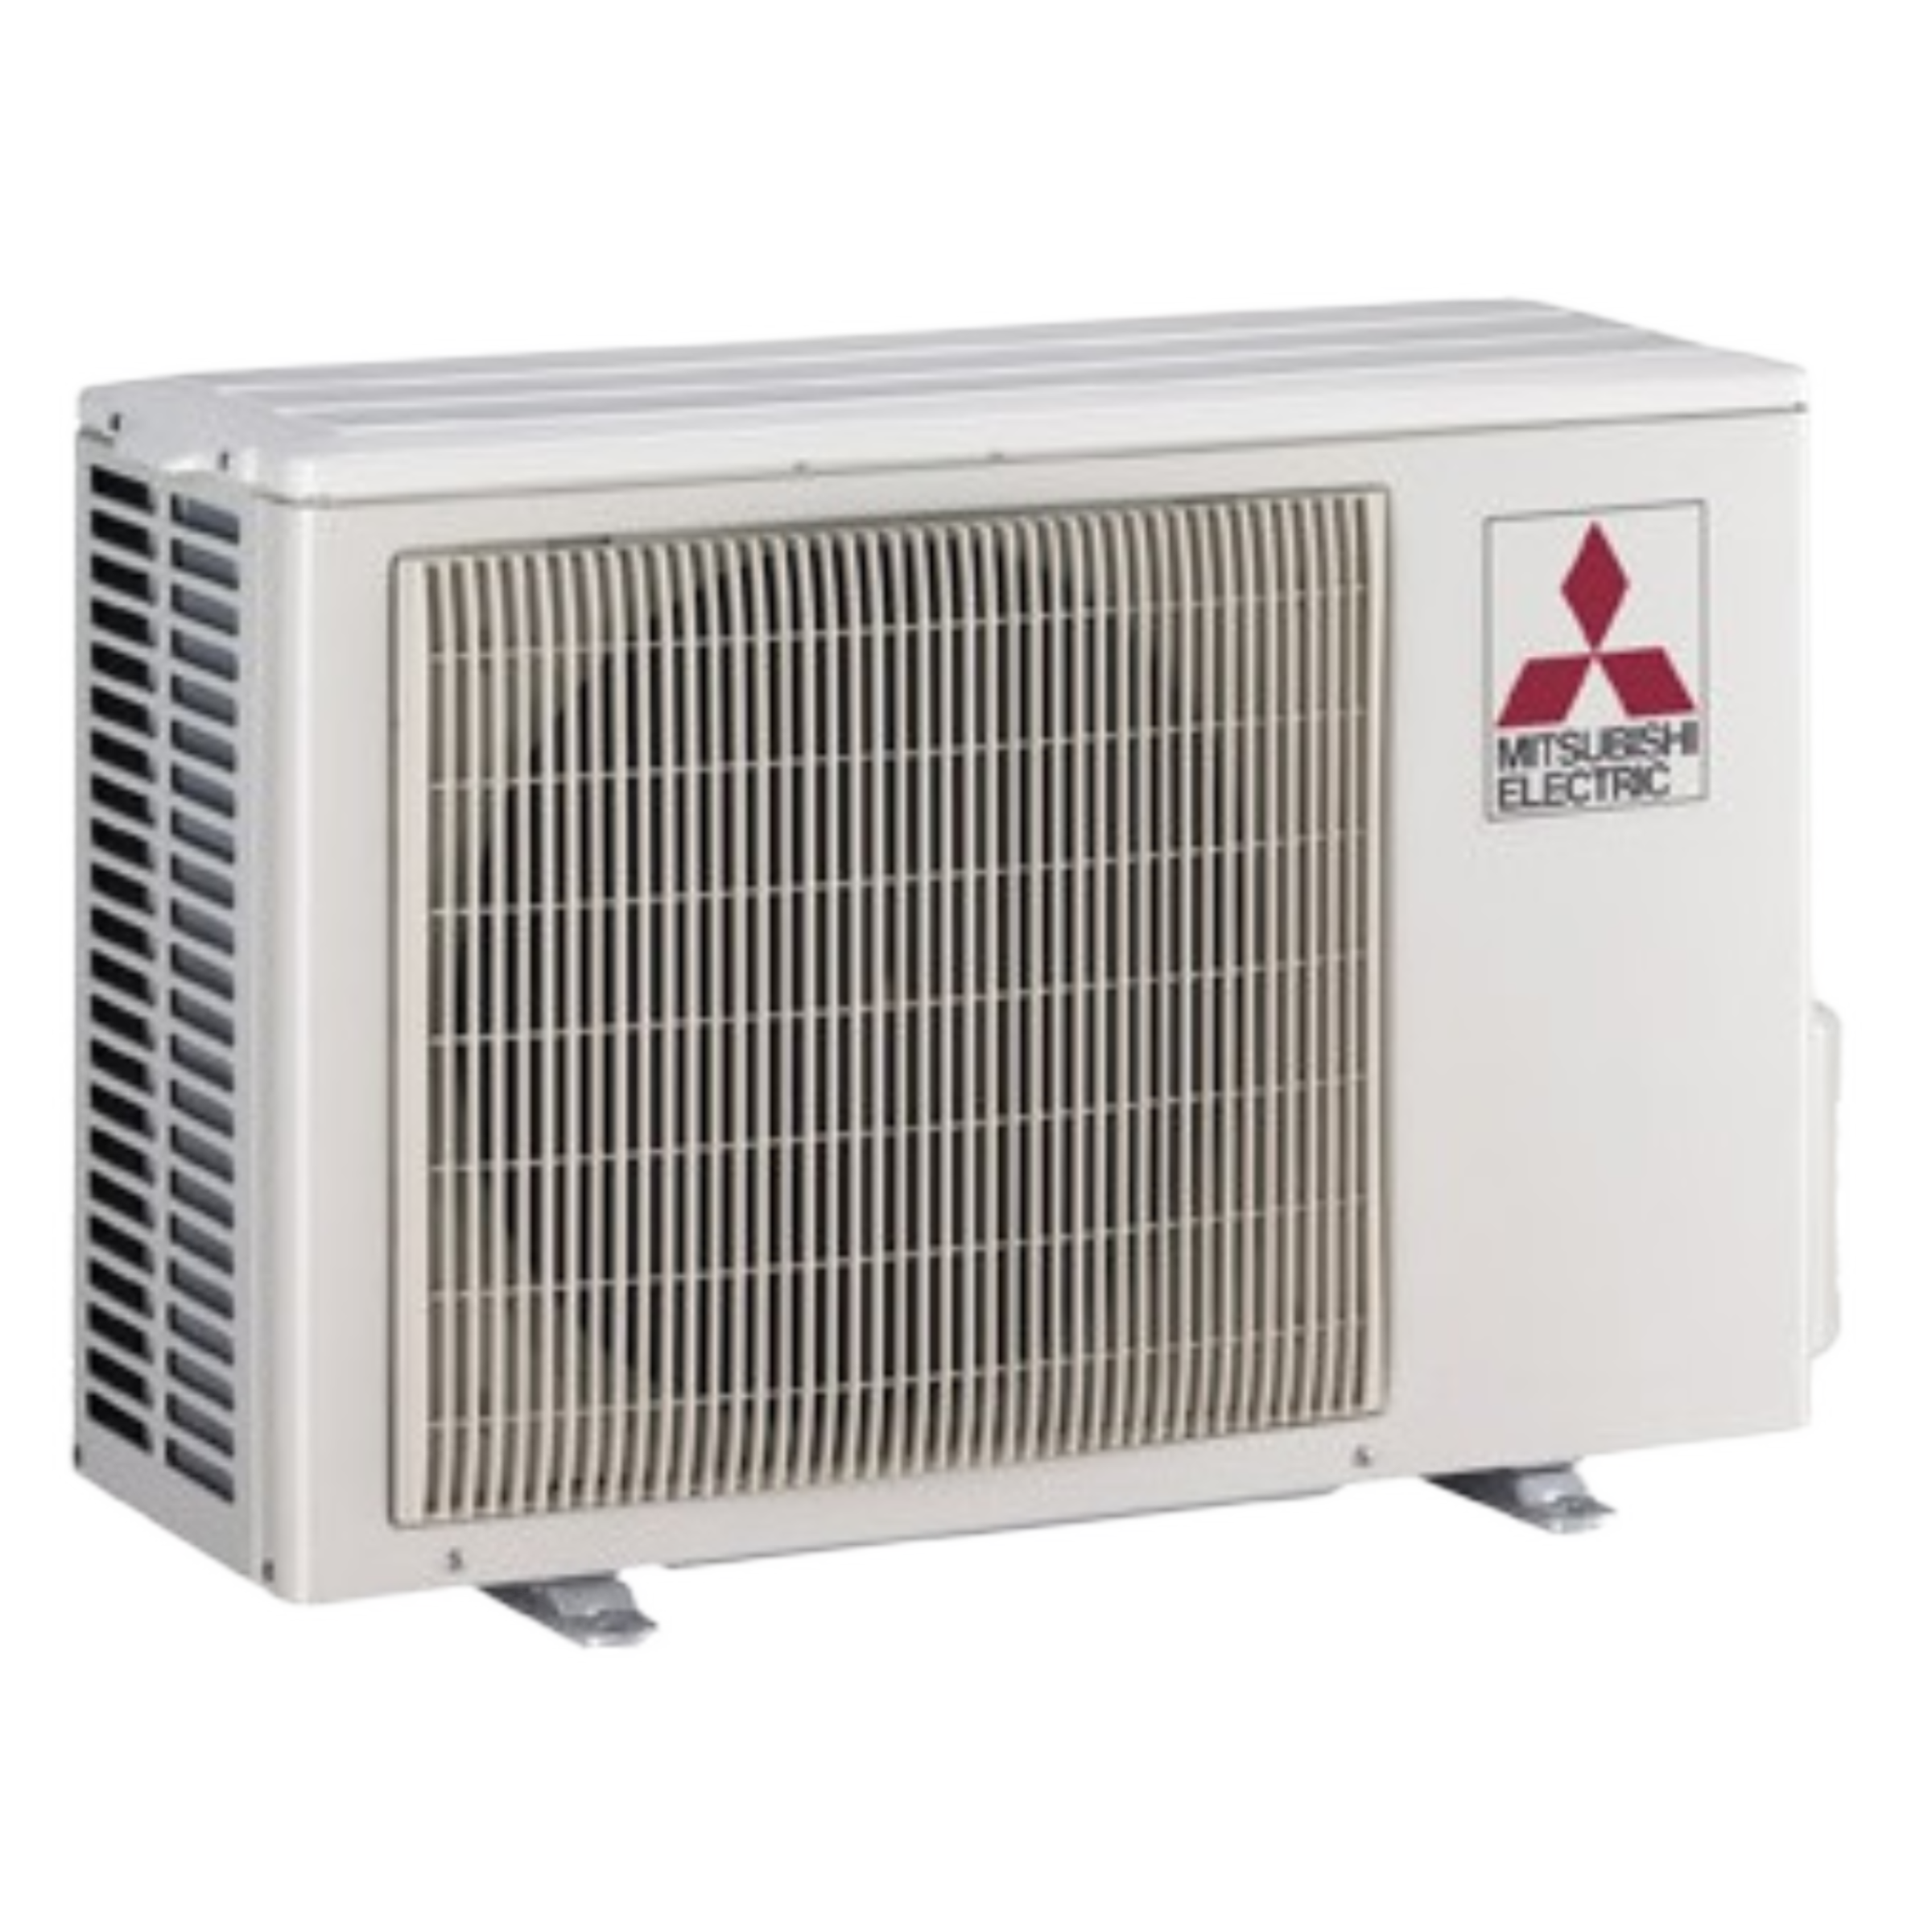 Mitsubishi M-Series 13 SEER Single-Zone Ductless Split System Wall Mounted Cooling Only Air Conditioner, 9000 BTU, 115V, R-410A